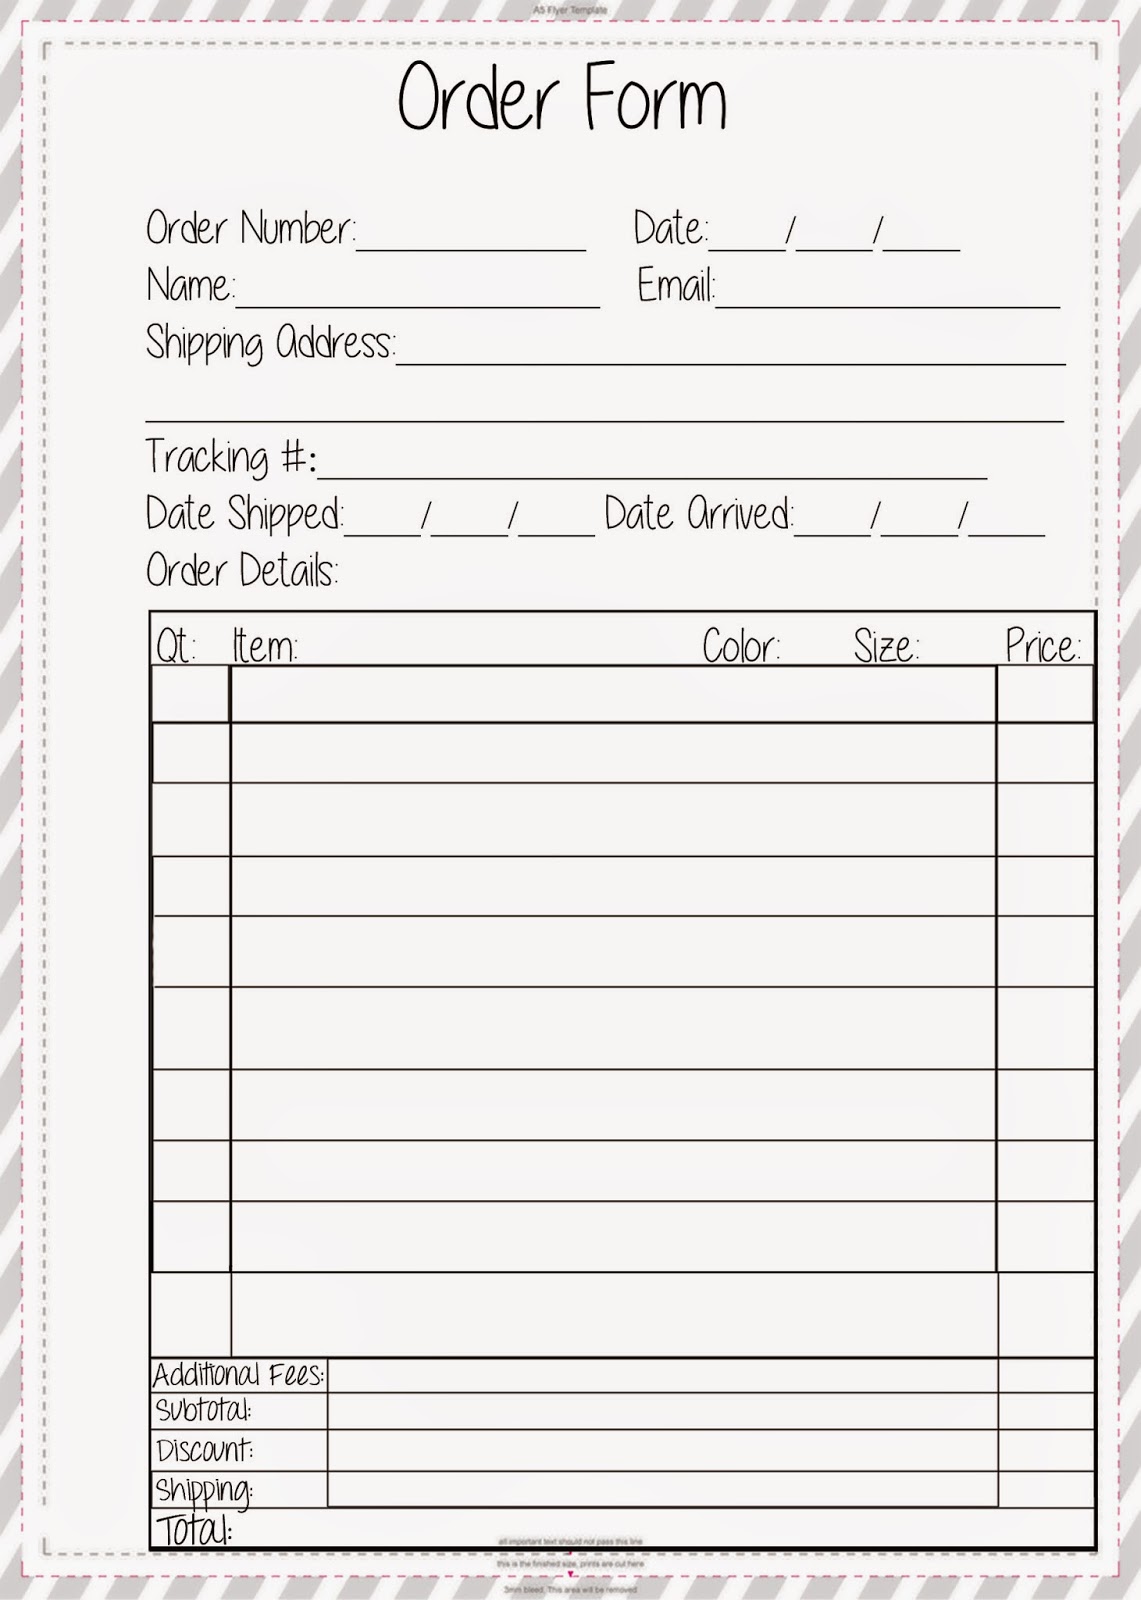 free-order-form-template-printable-printable-forms-free-online